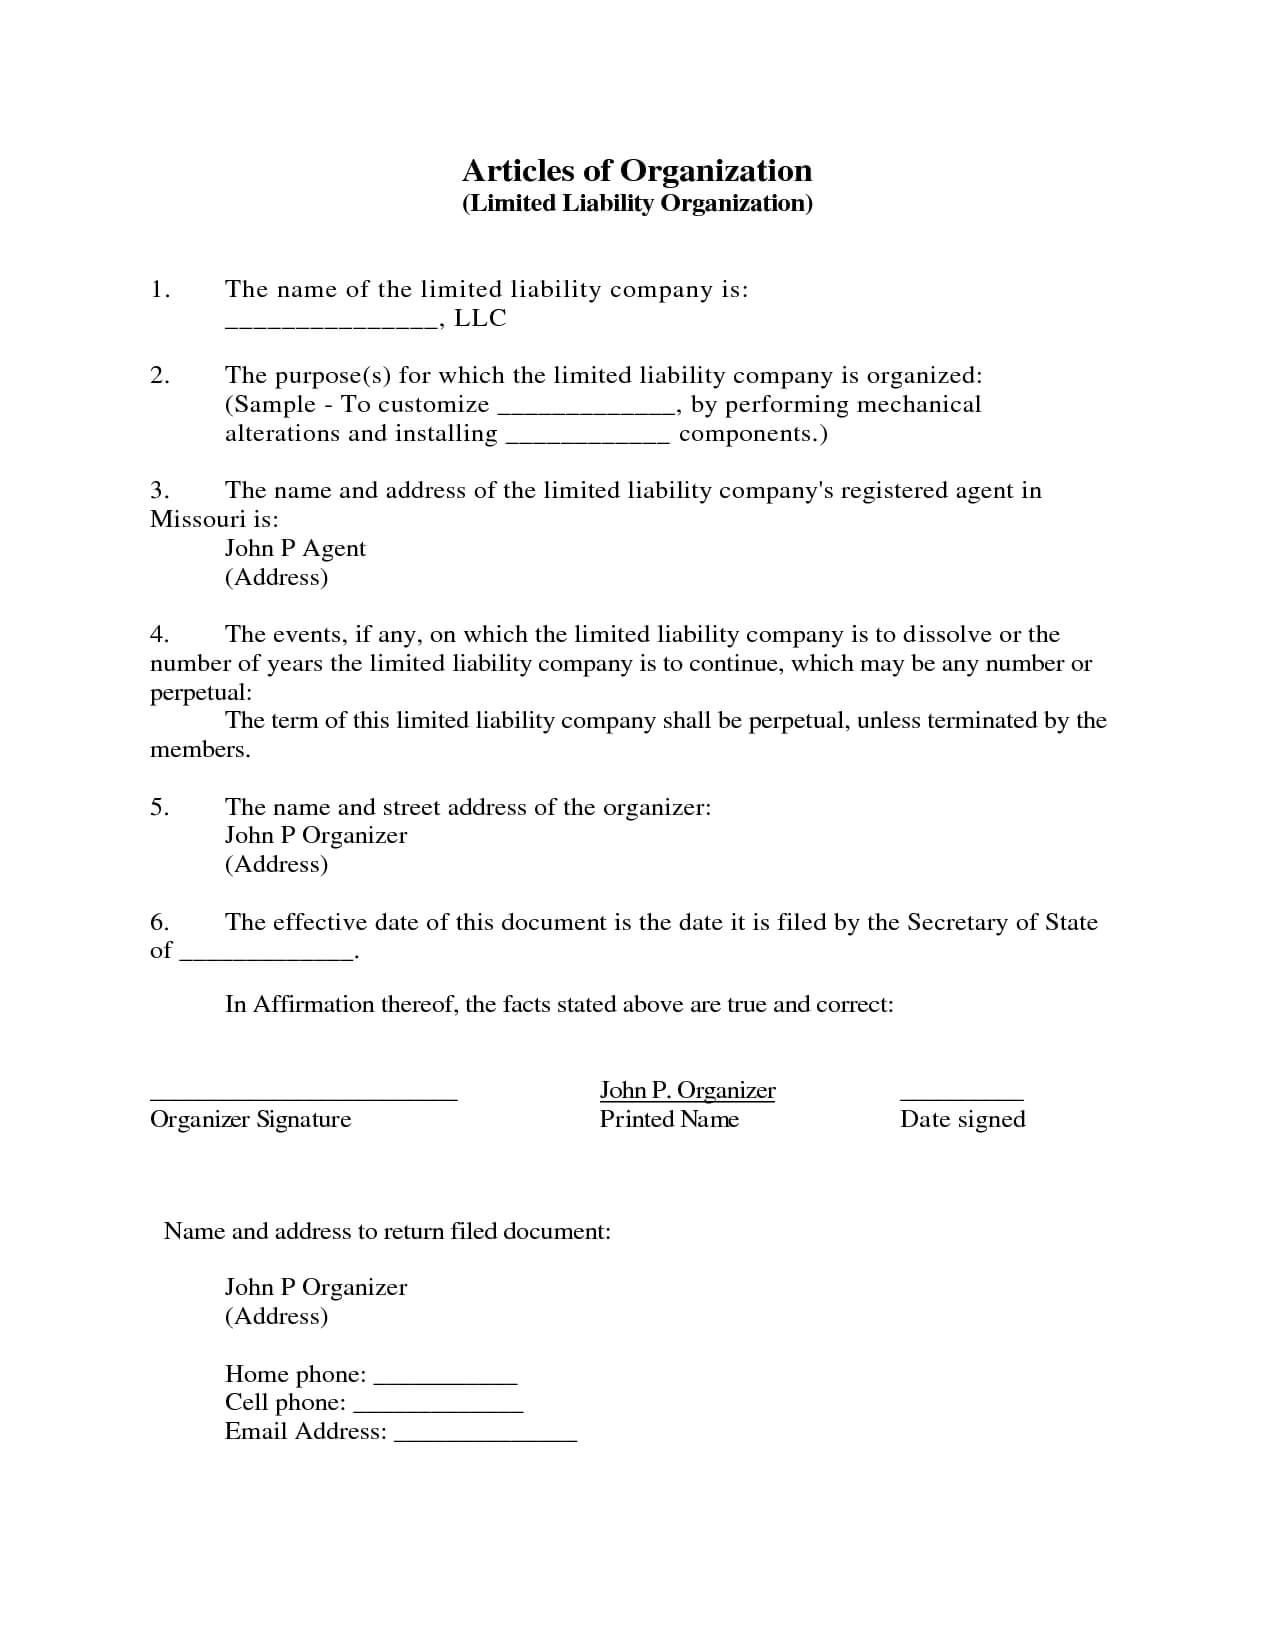 Sample Articles Of Organization | Templates And Samples For Articles Of Organization Llc Template